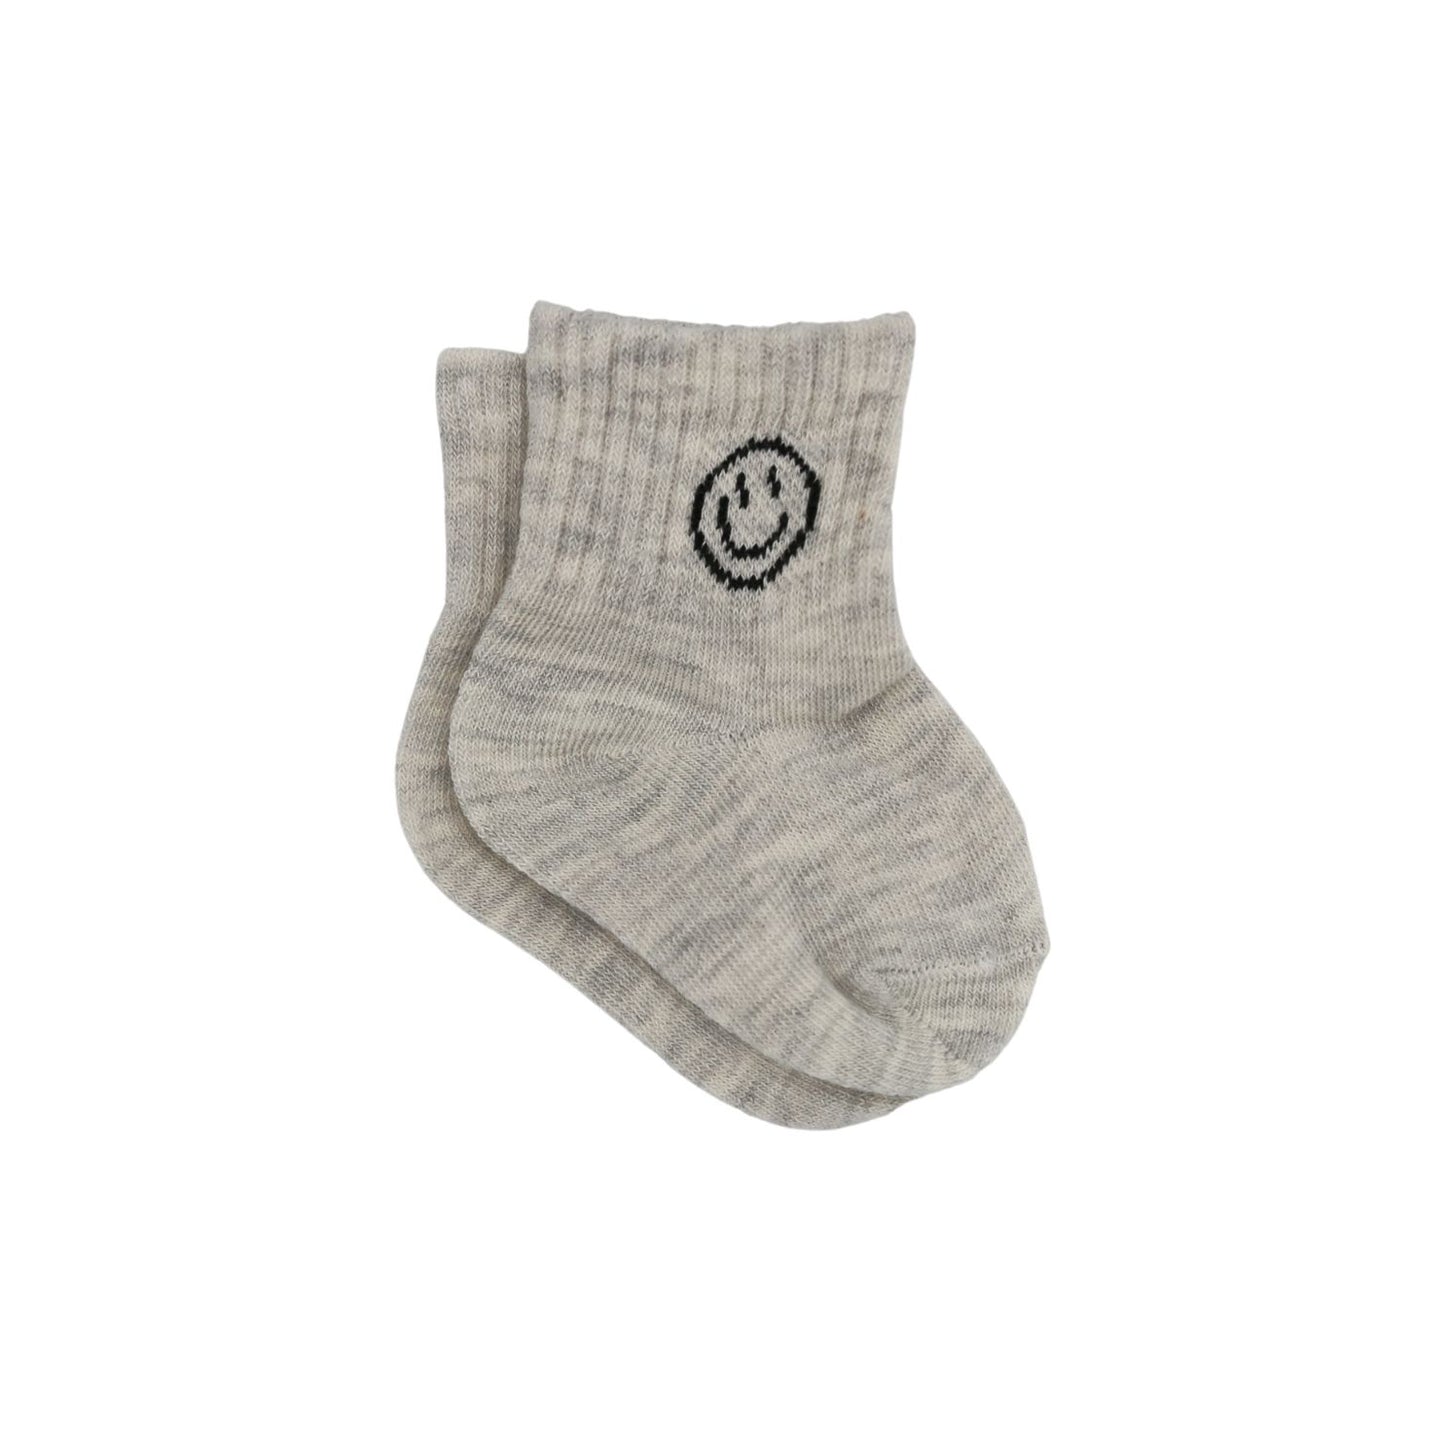 The Baby Cubby Smiling Face Socks - Light Grey